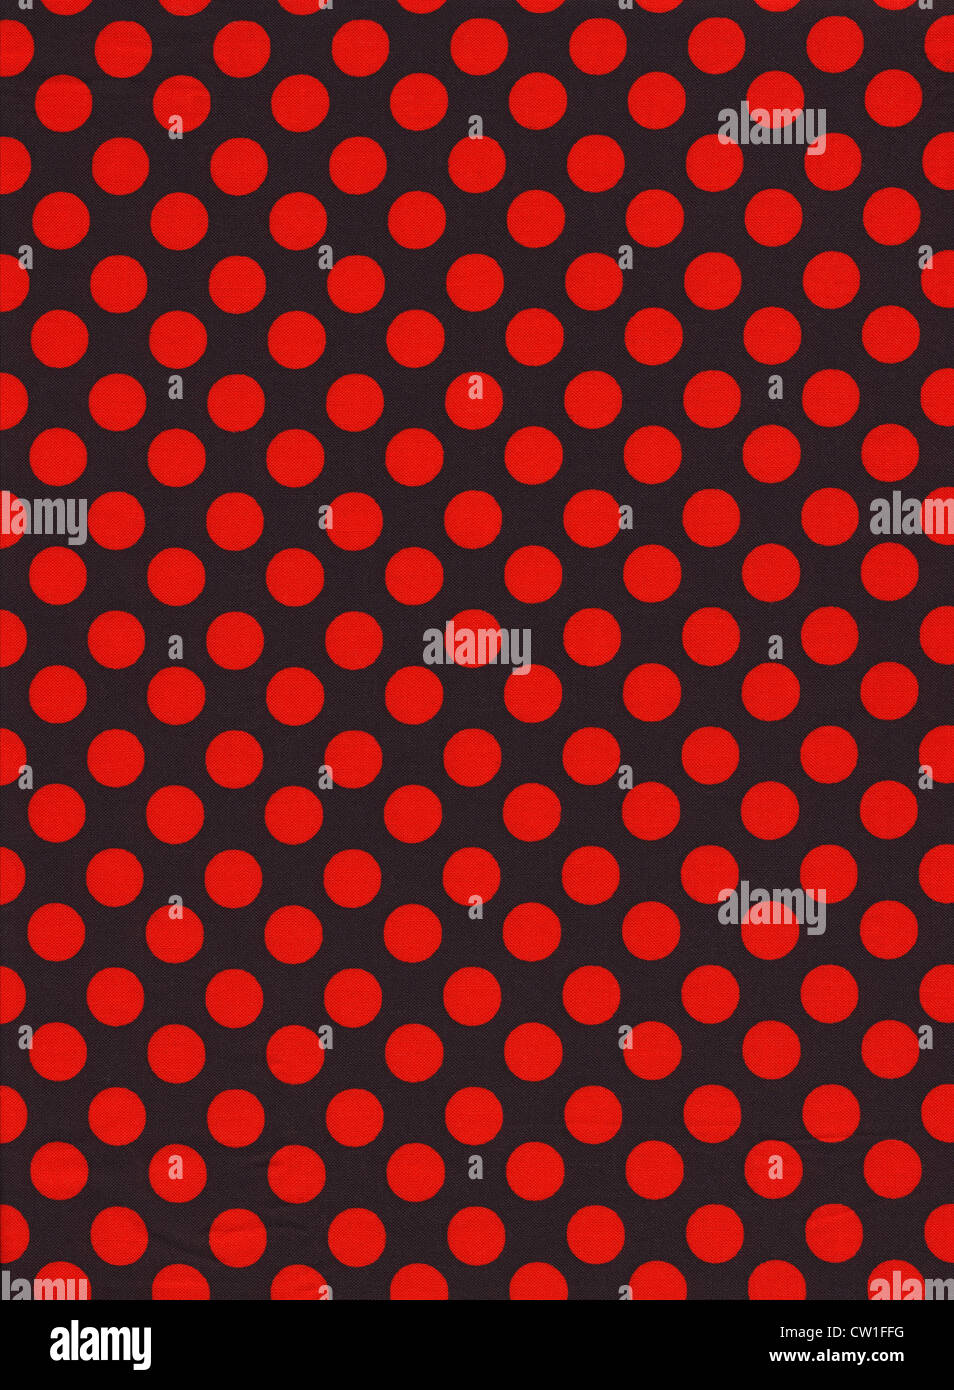 Black Fabric Background With Red Polka Dot Pattern Stock